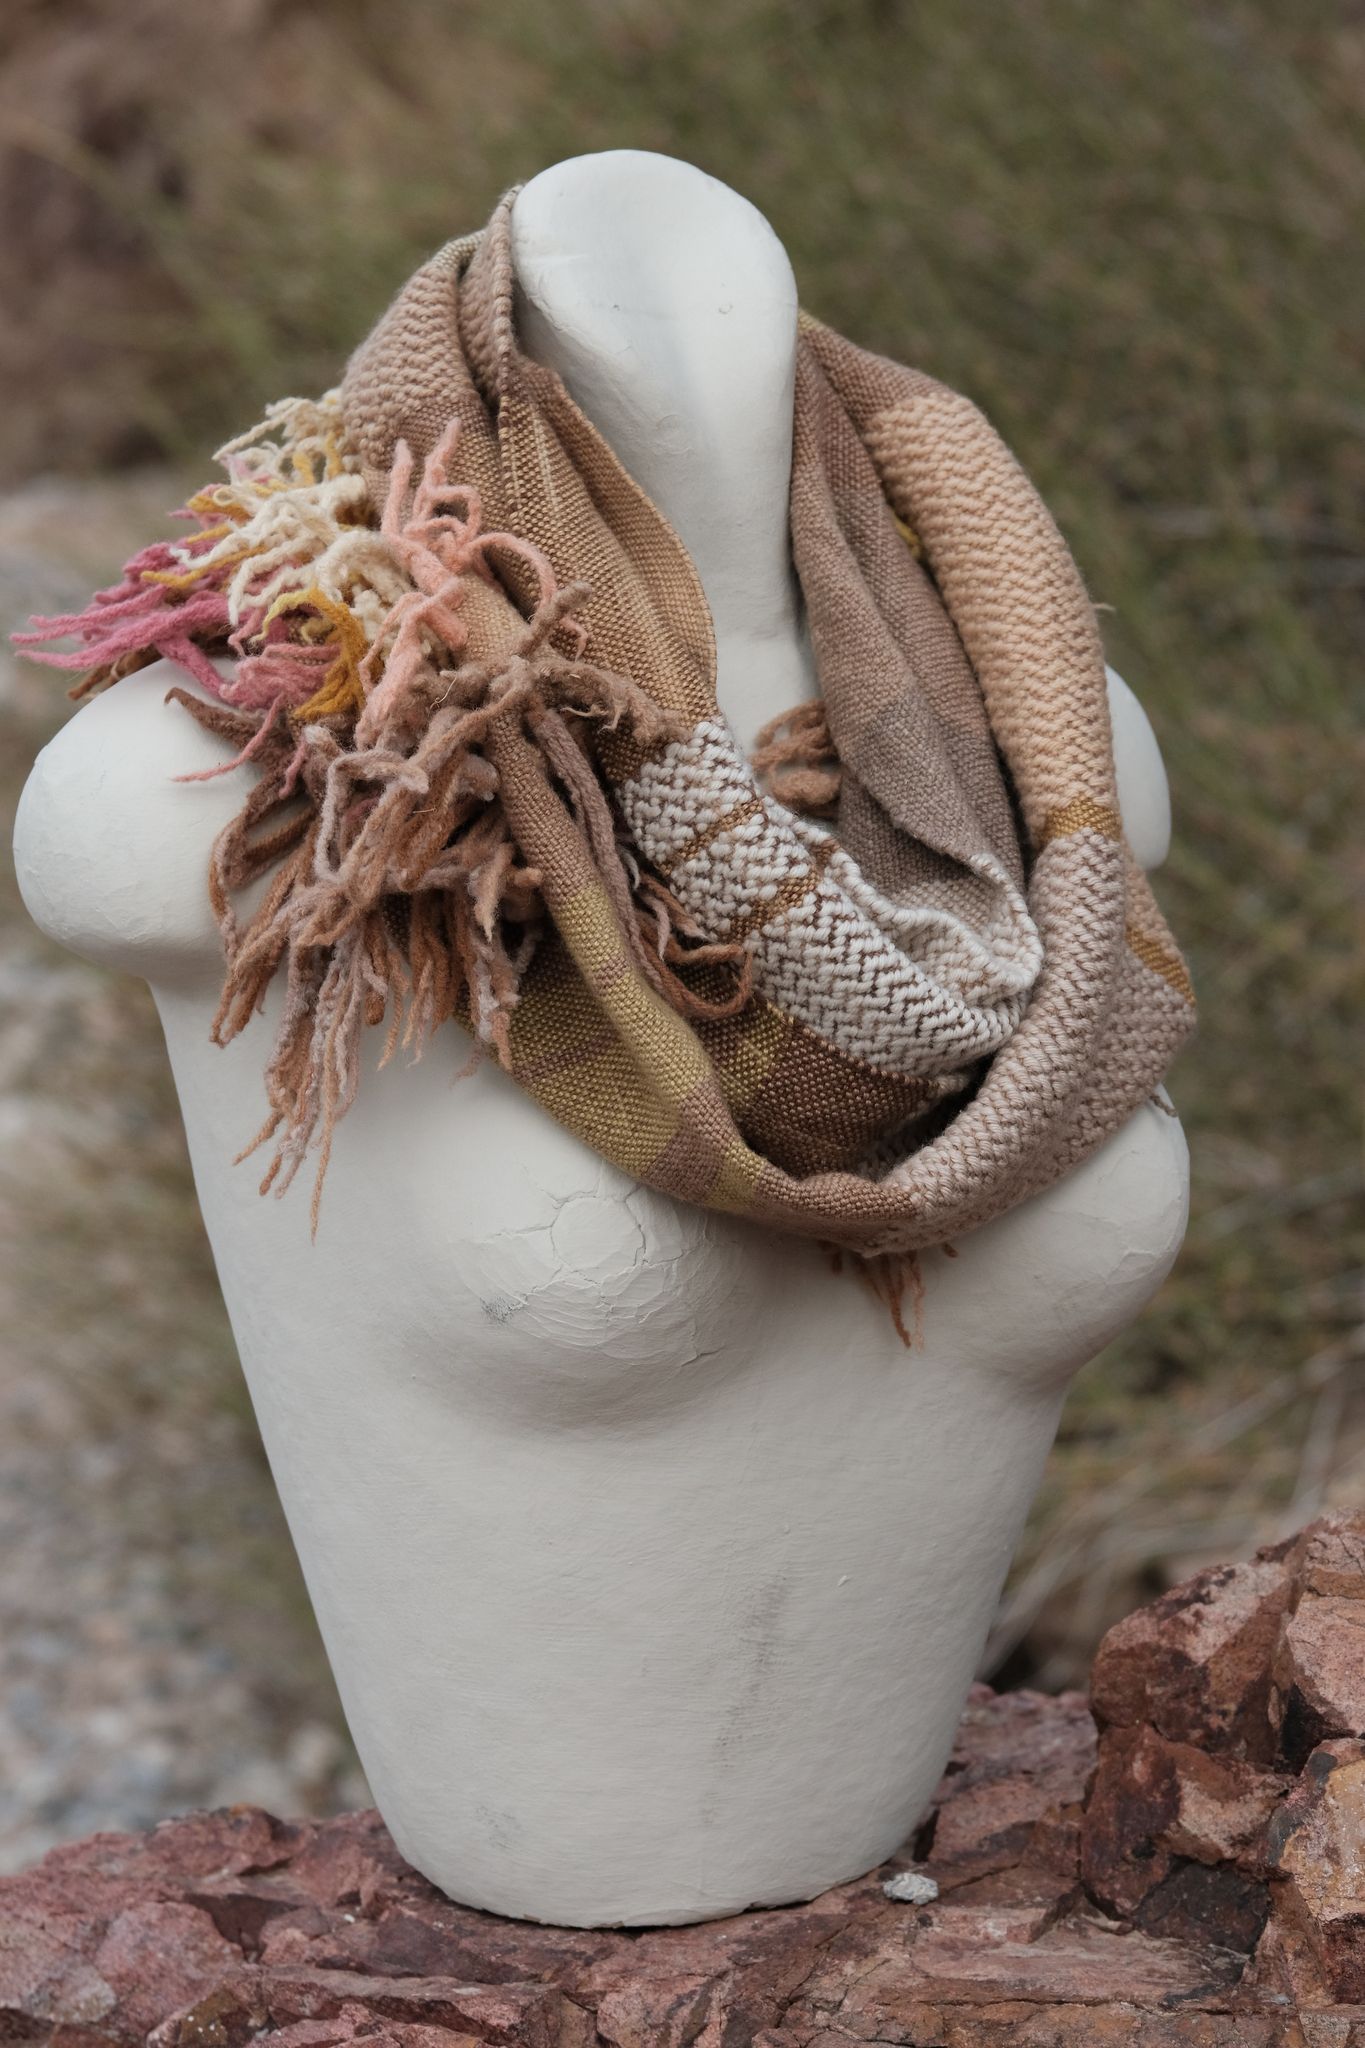 Handwoven naturally dyed brown, pink, yellow, tan and red merino scarf with sculptural fringe on a white mannequin, sitting on a tan rock.